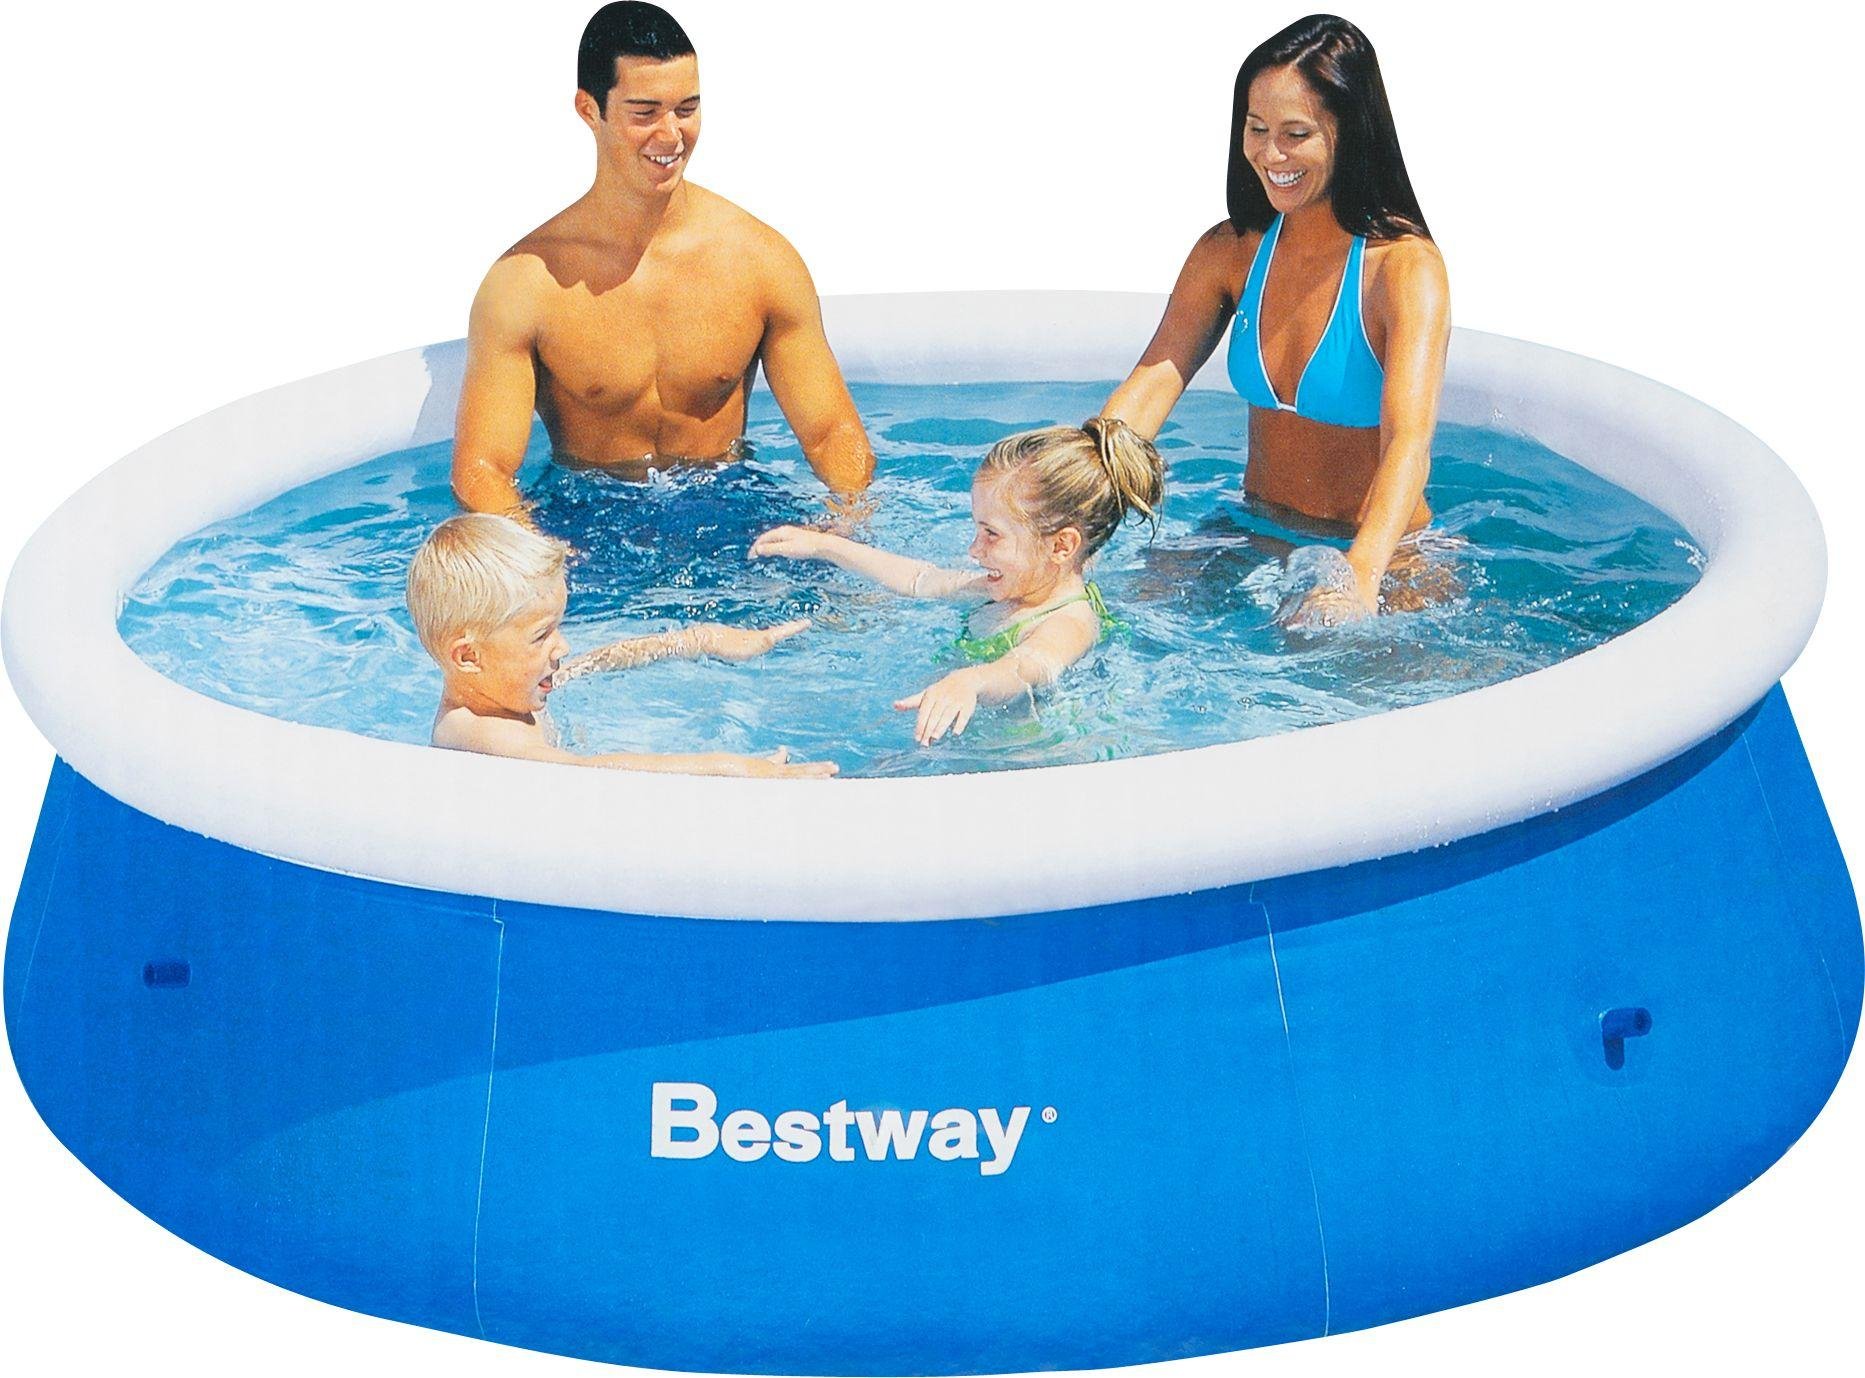 Bestway 8ft Quick Up Round Family Pool Review